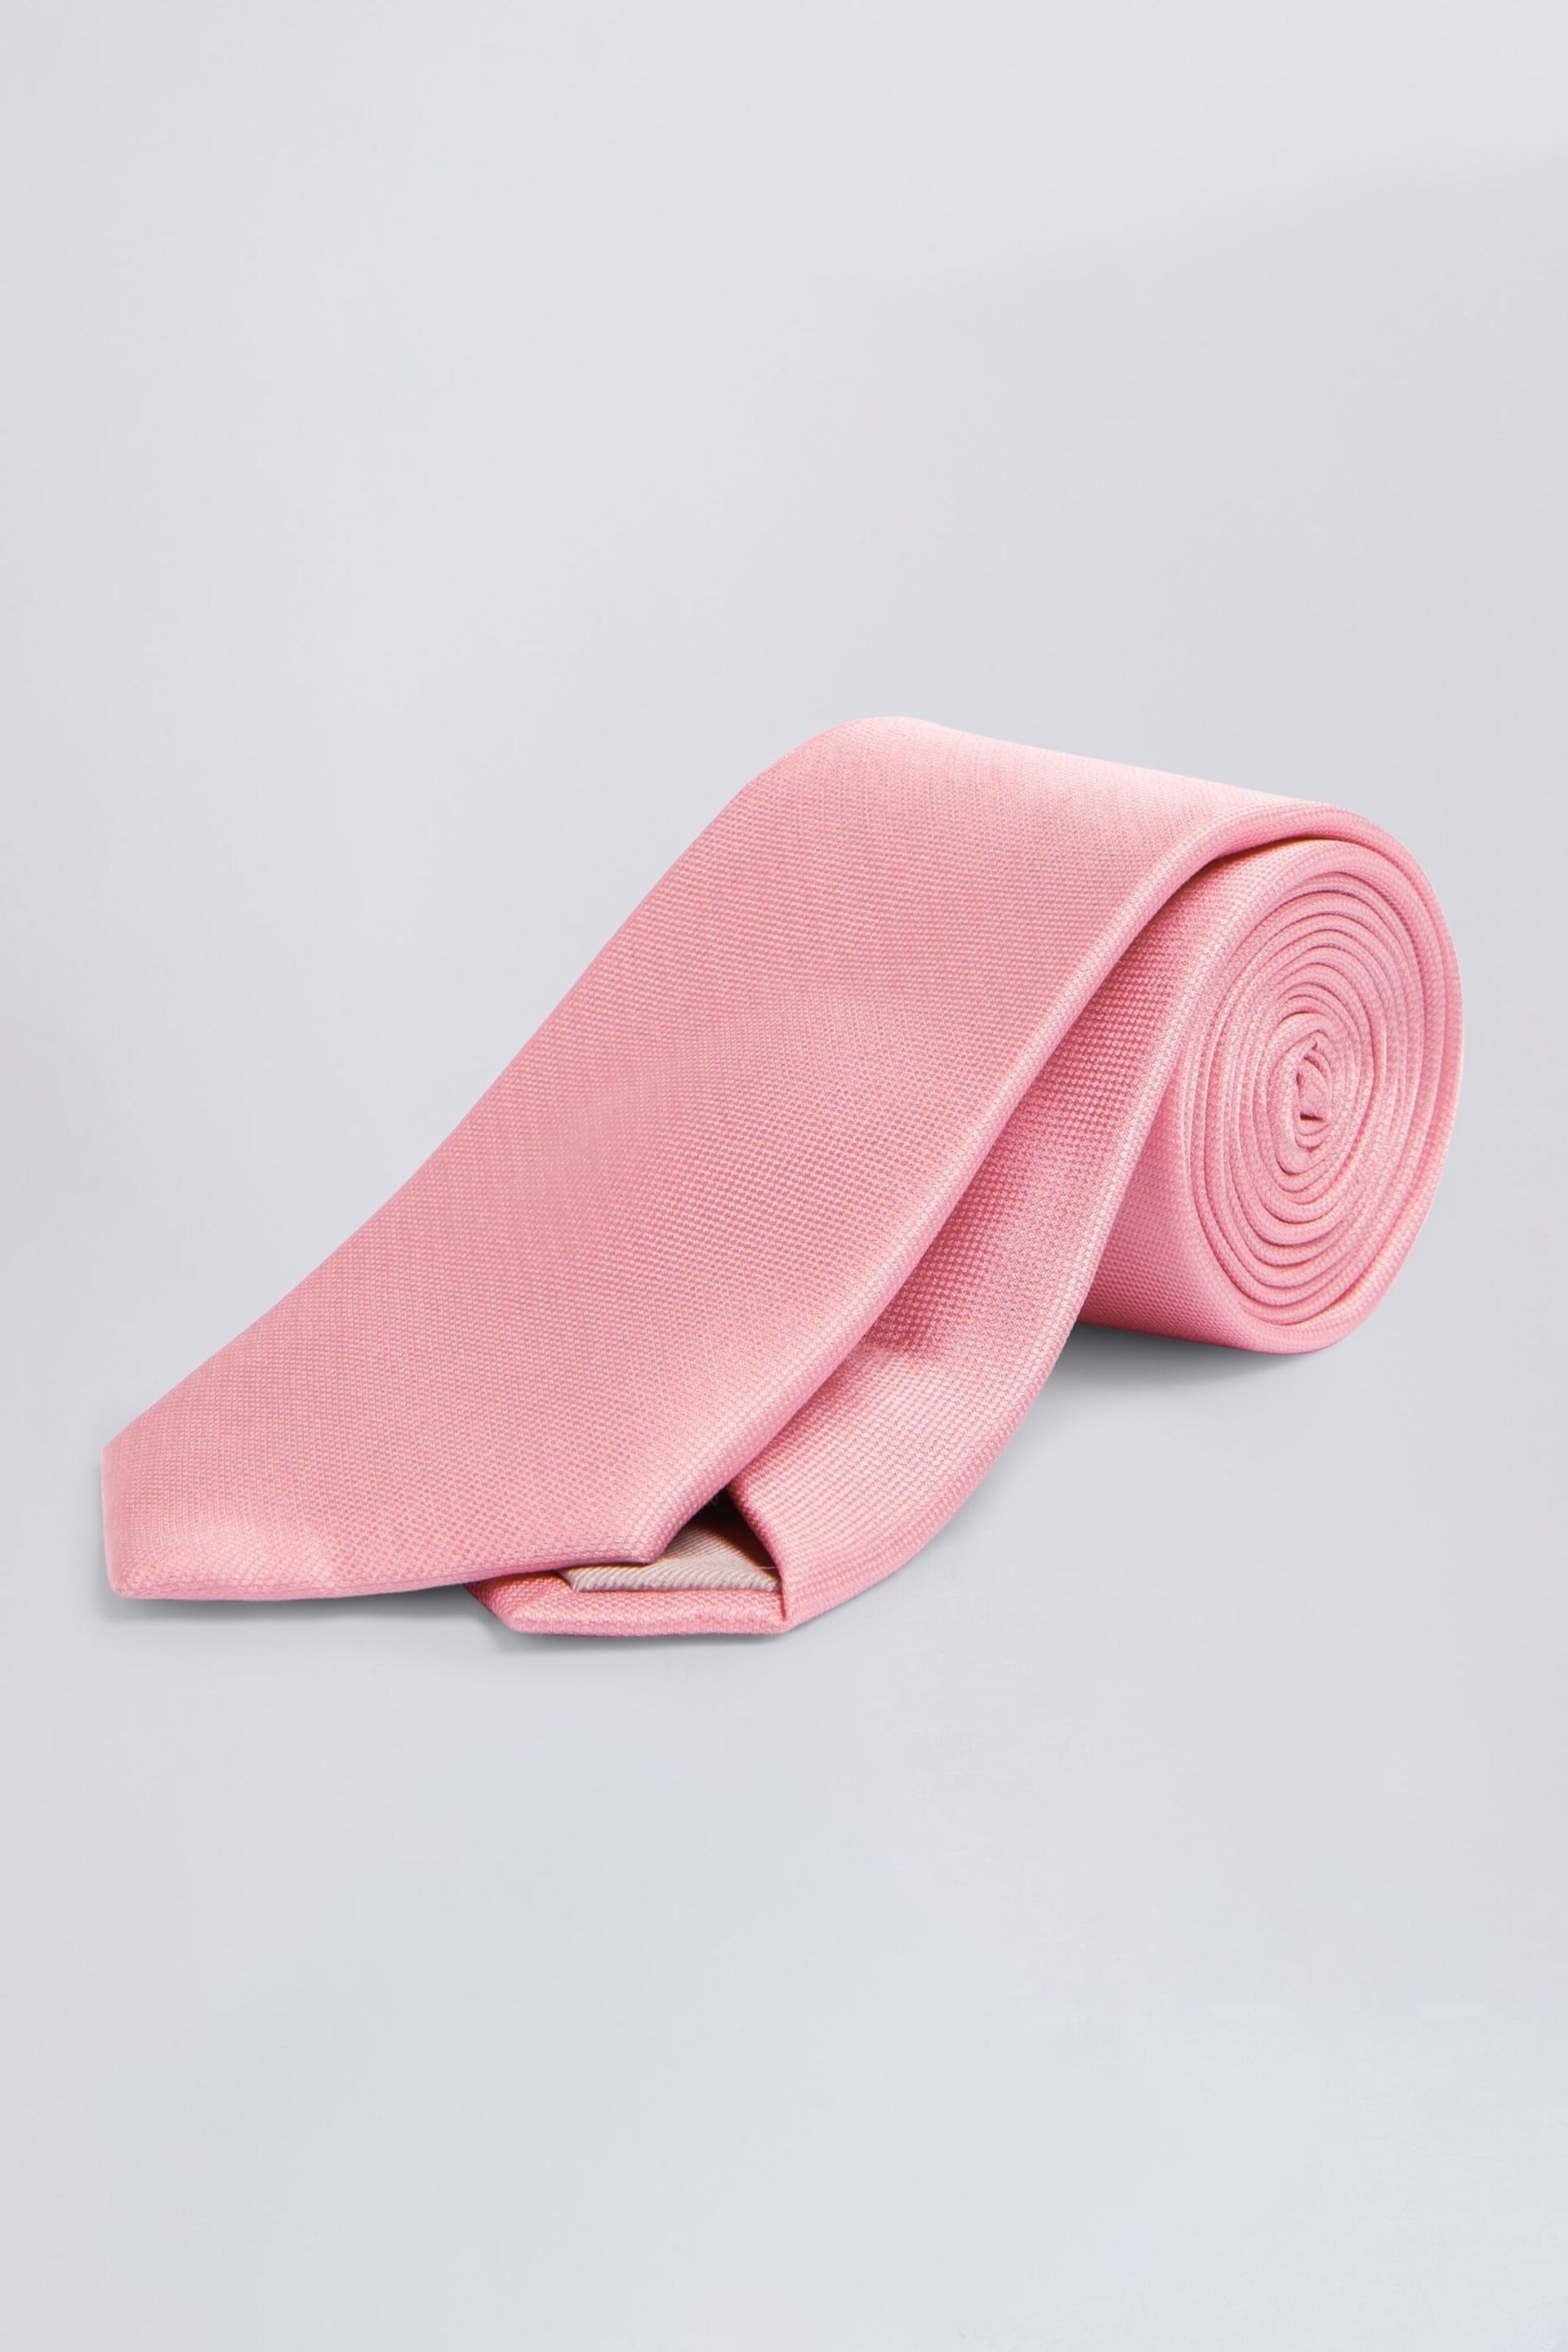 MOSS Pink Oxford Silk Tie - Image 1 of 1